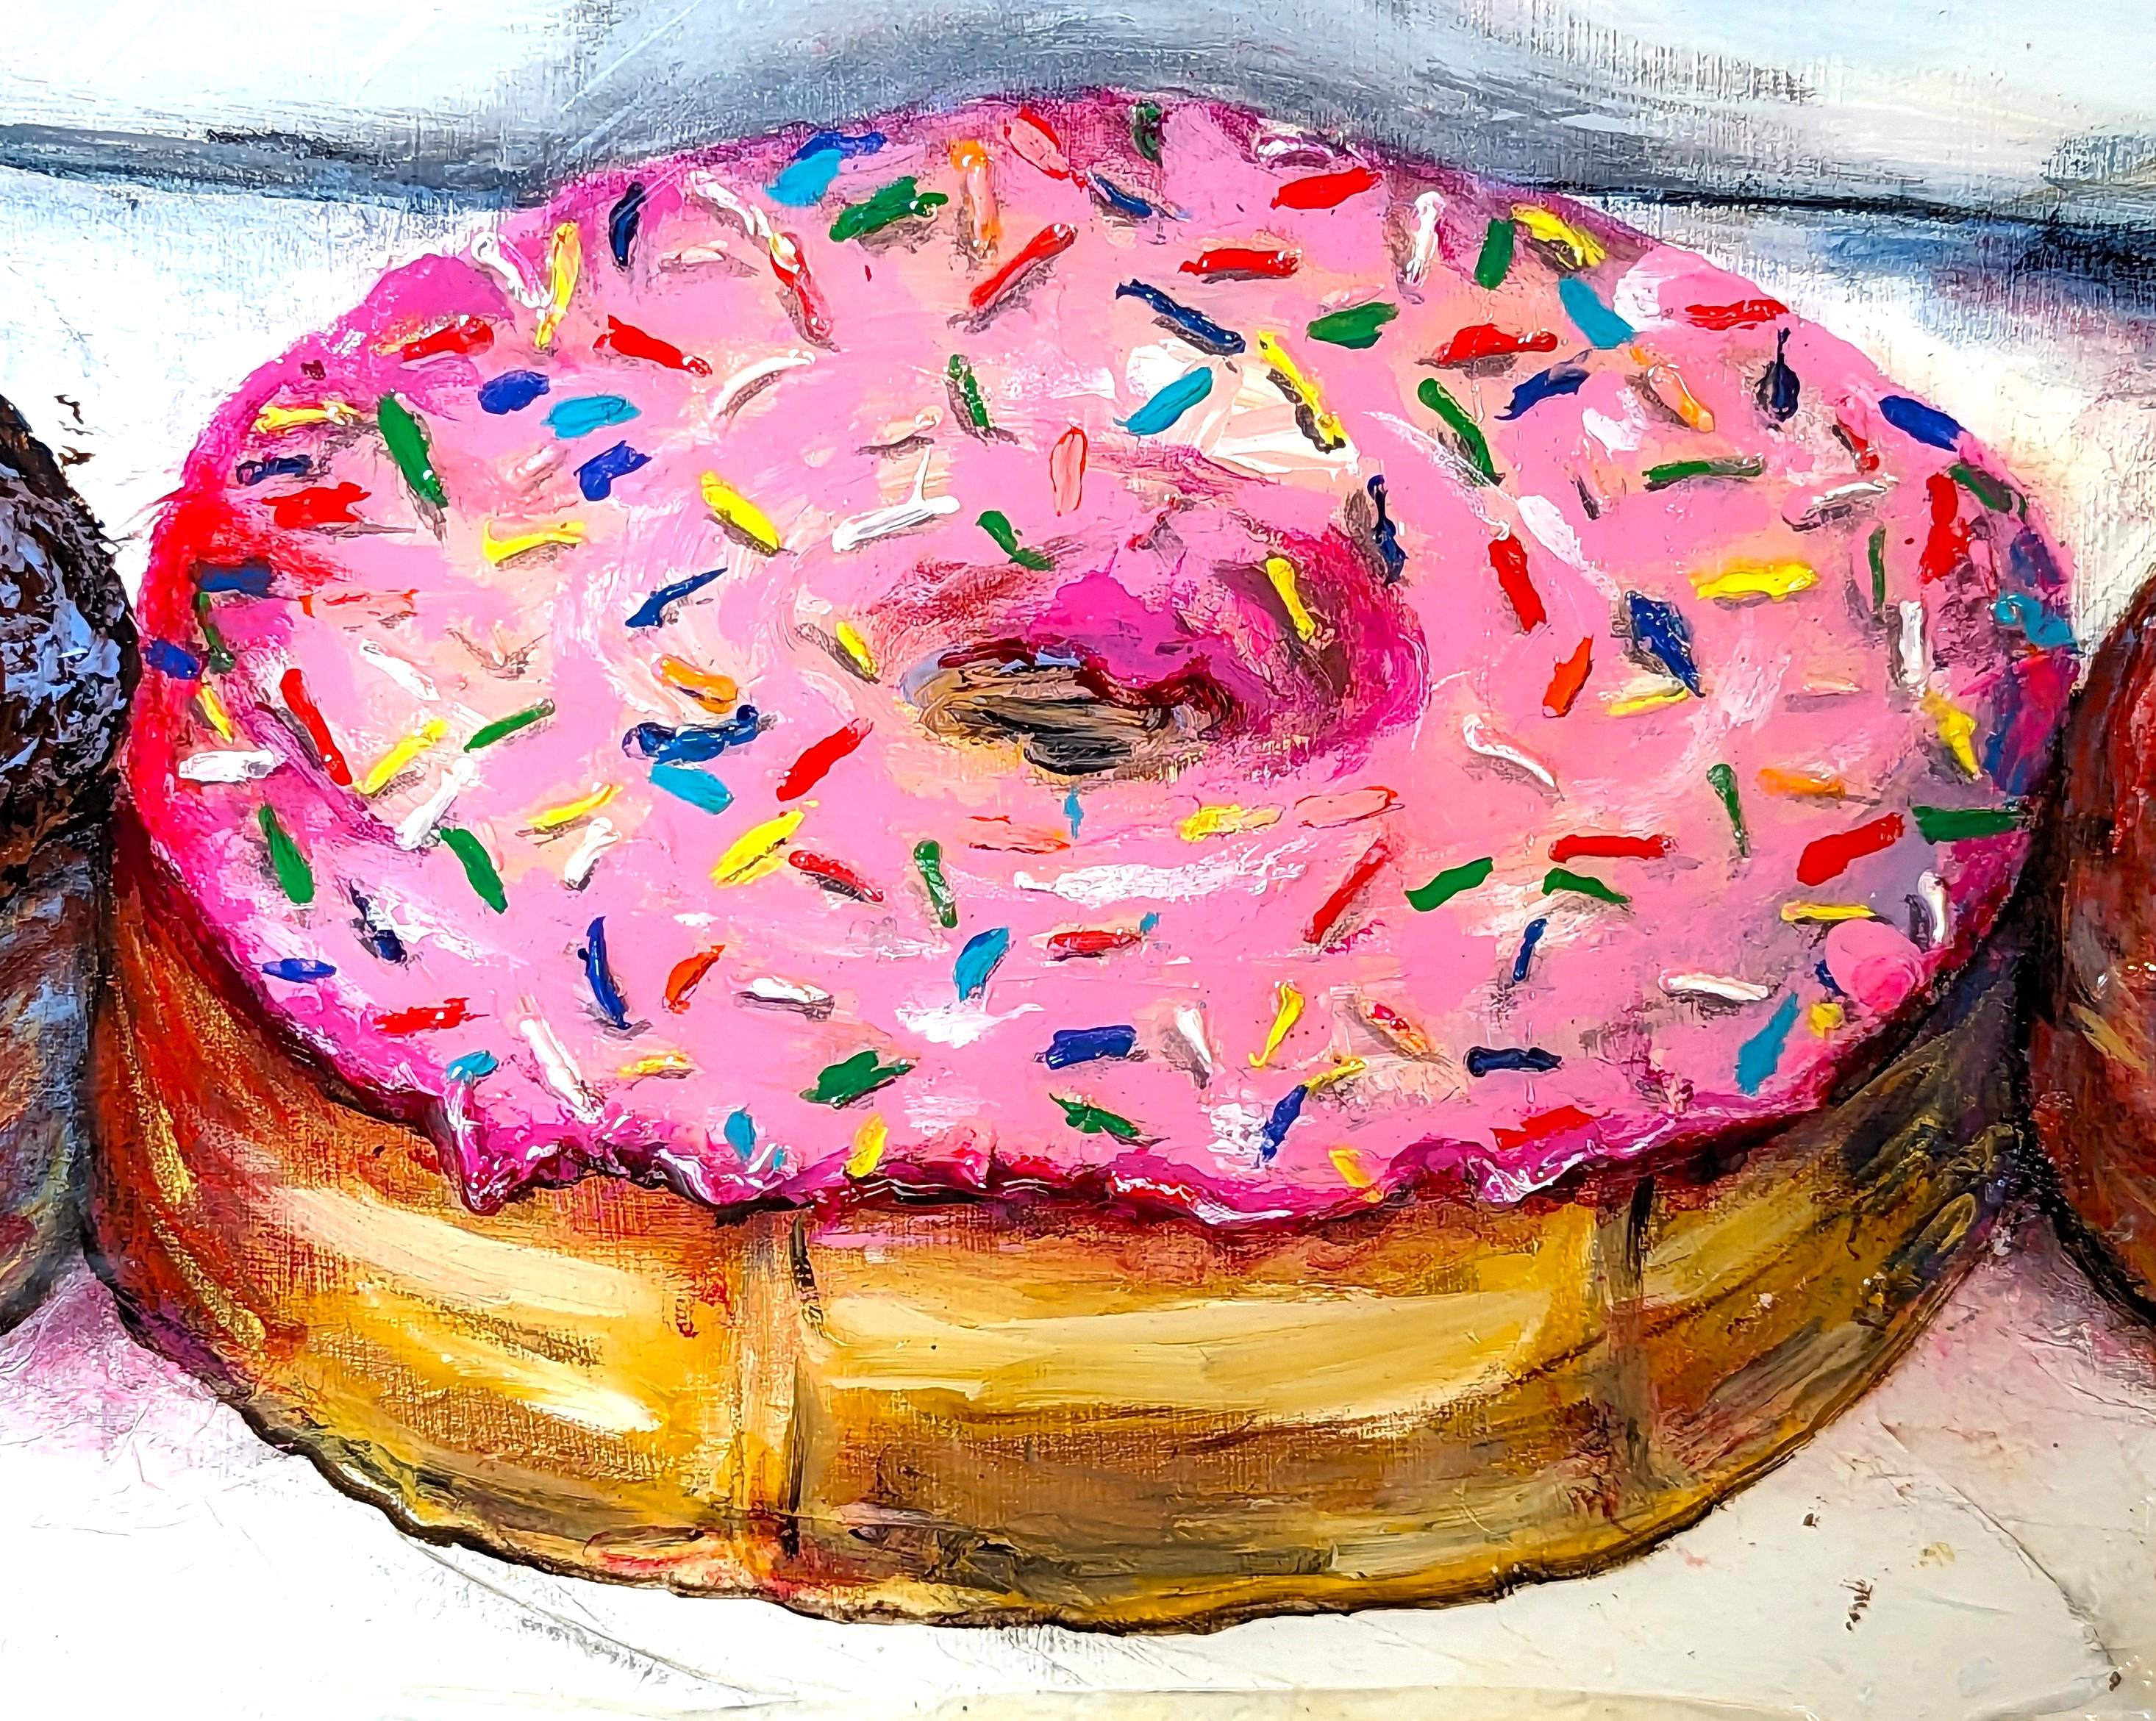 “Shipley's Do-Nuts” Contemporary Colorful Mixed Media Food Collage For Sale 6